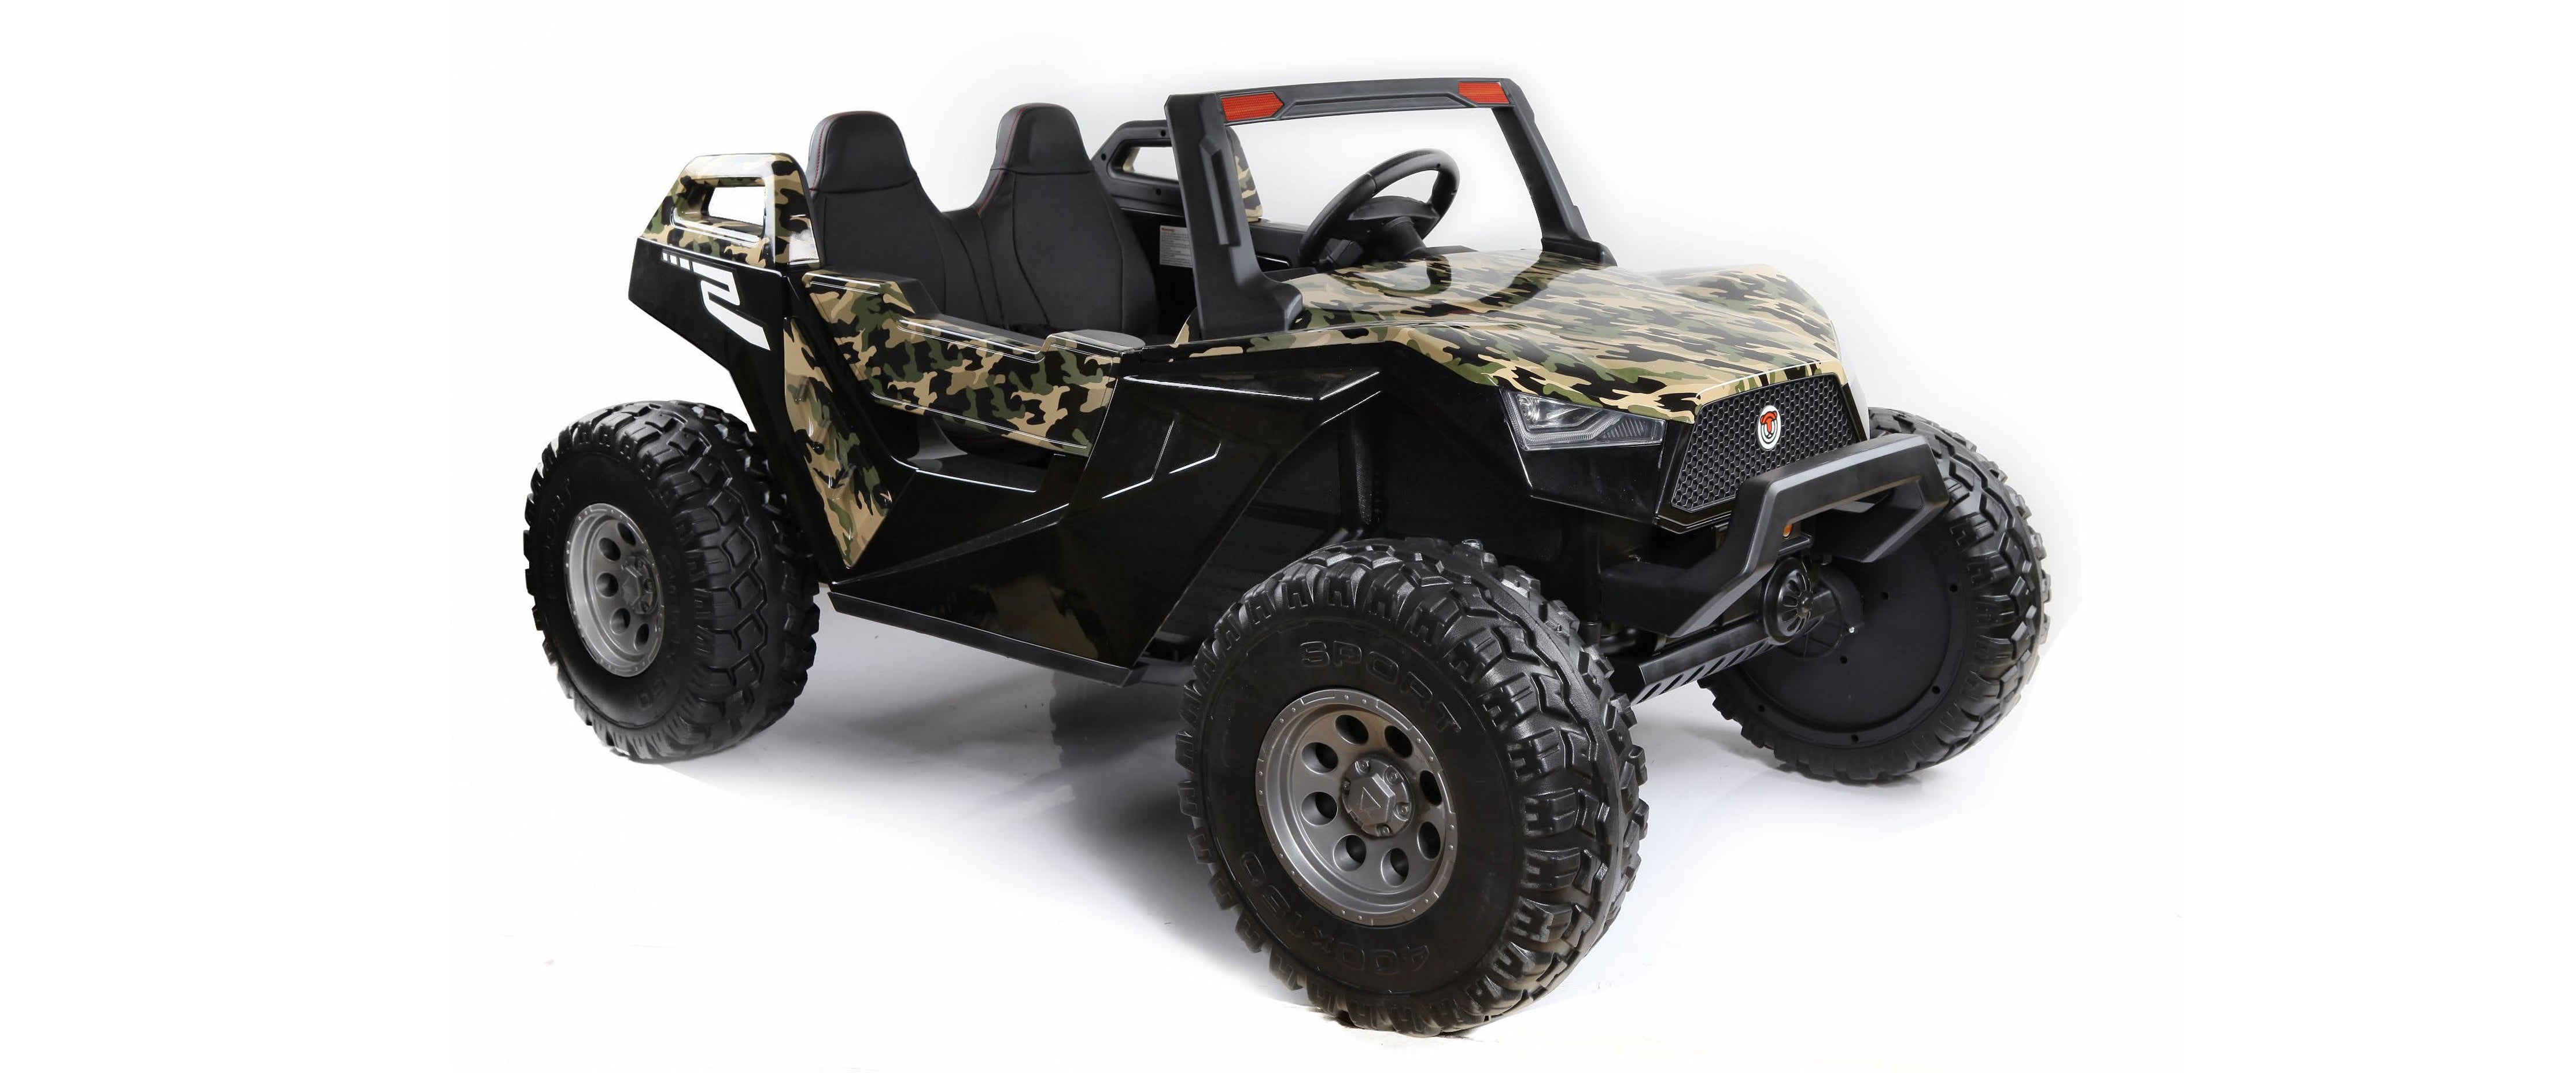 24V 2 seaters off-road dune buggy ride on truck in camo green by voltz toys